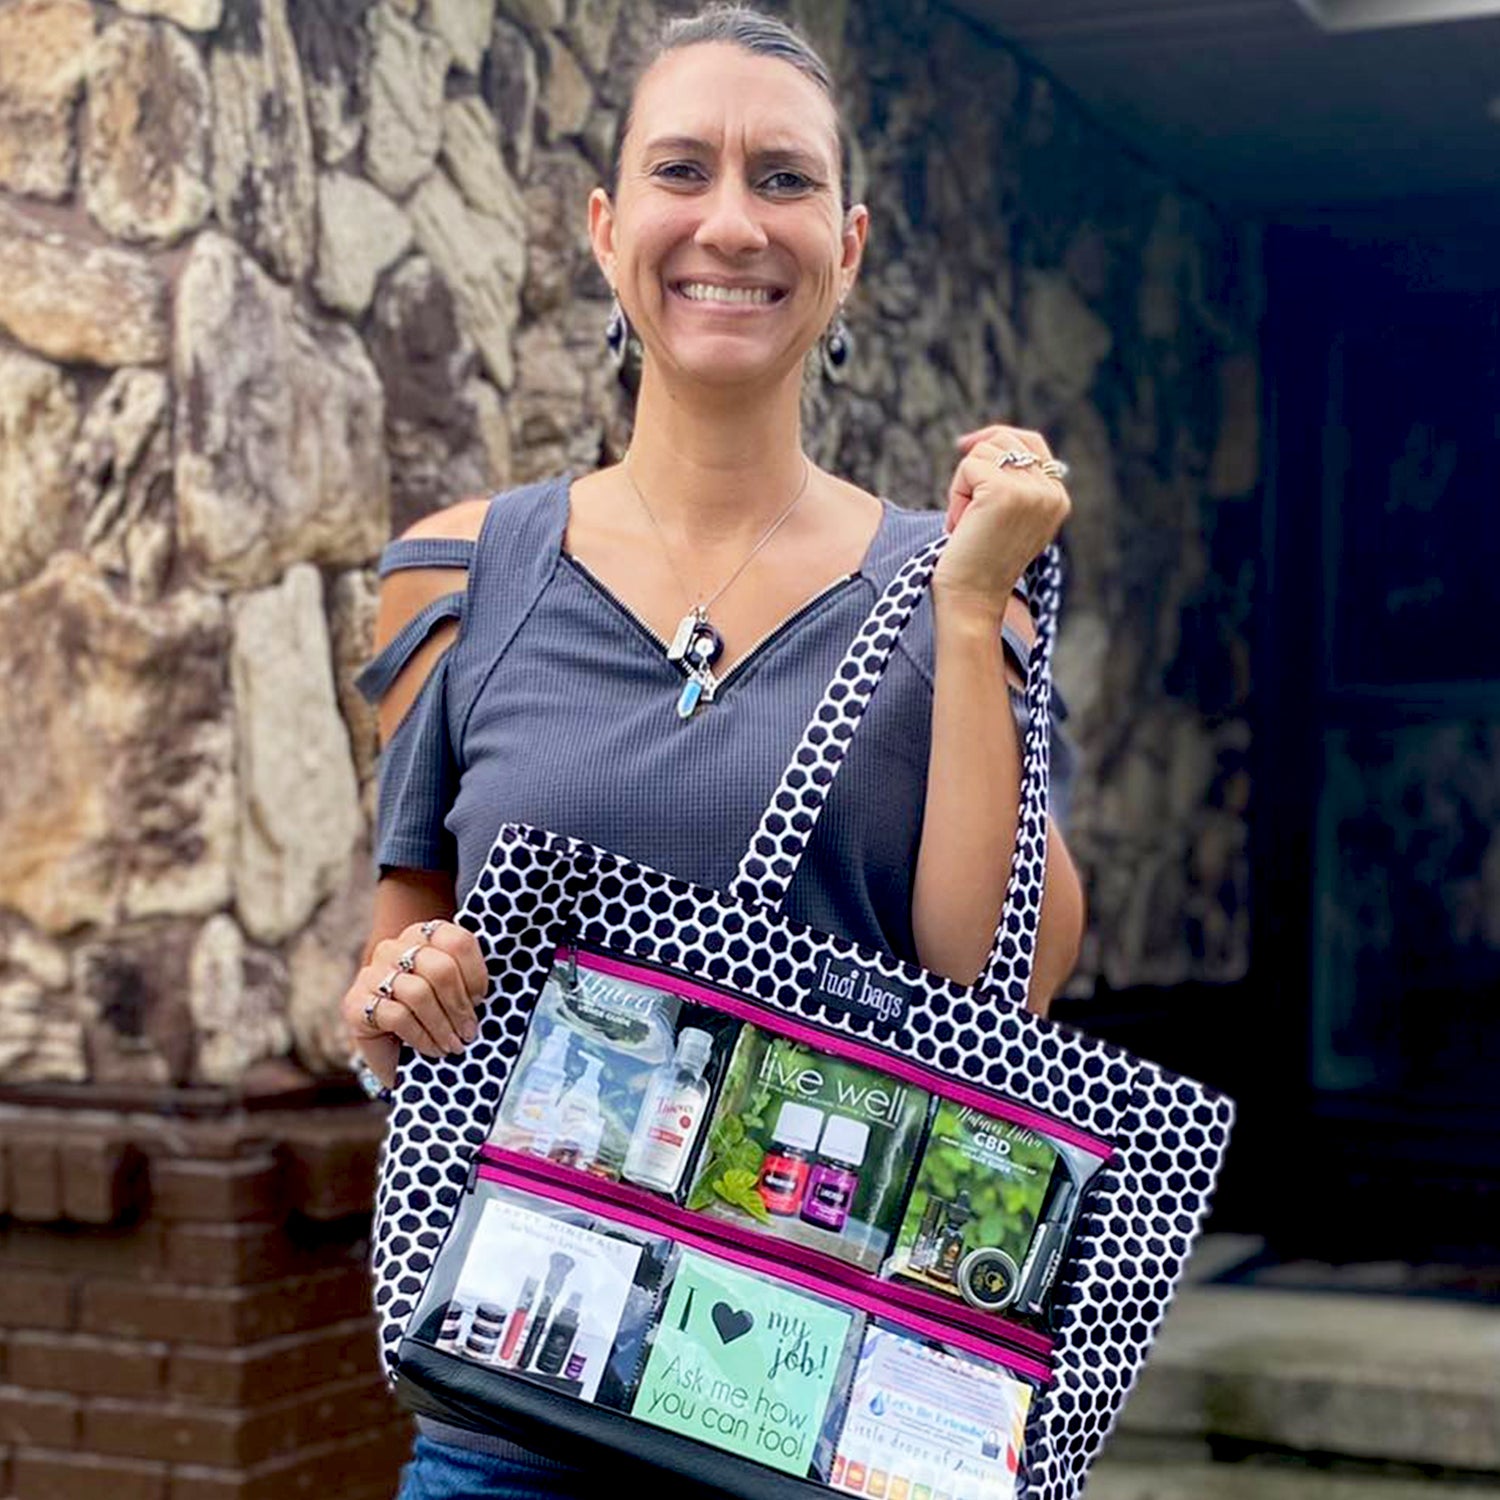 Woman holding a black and white bag with pink trim.  Pockets are filled with images marketing her oil business.